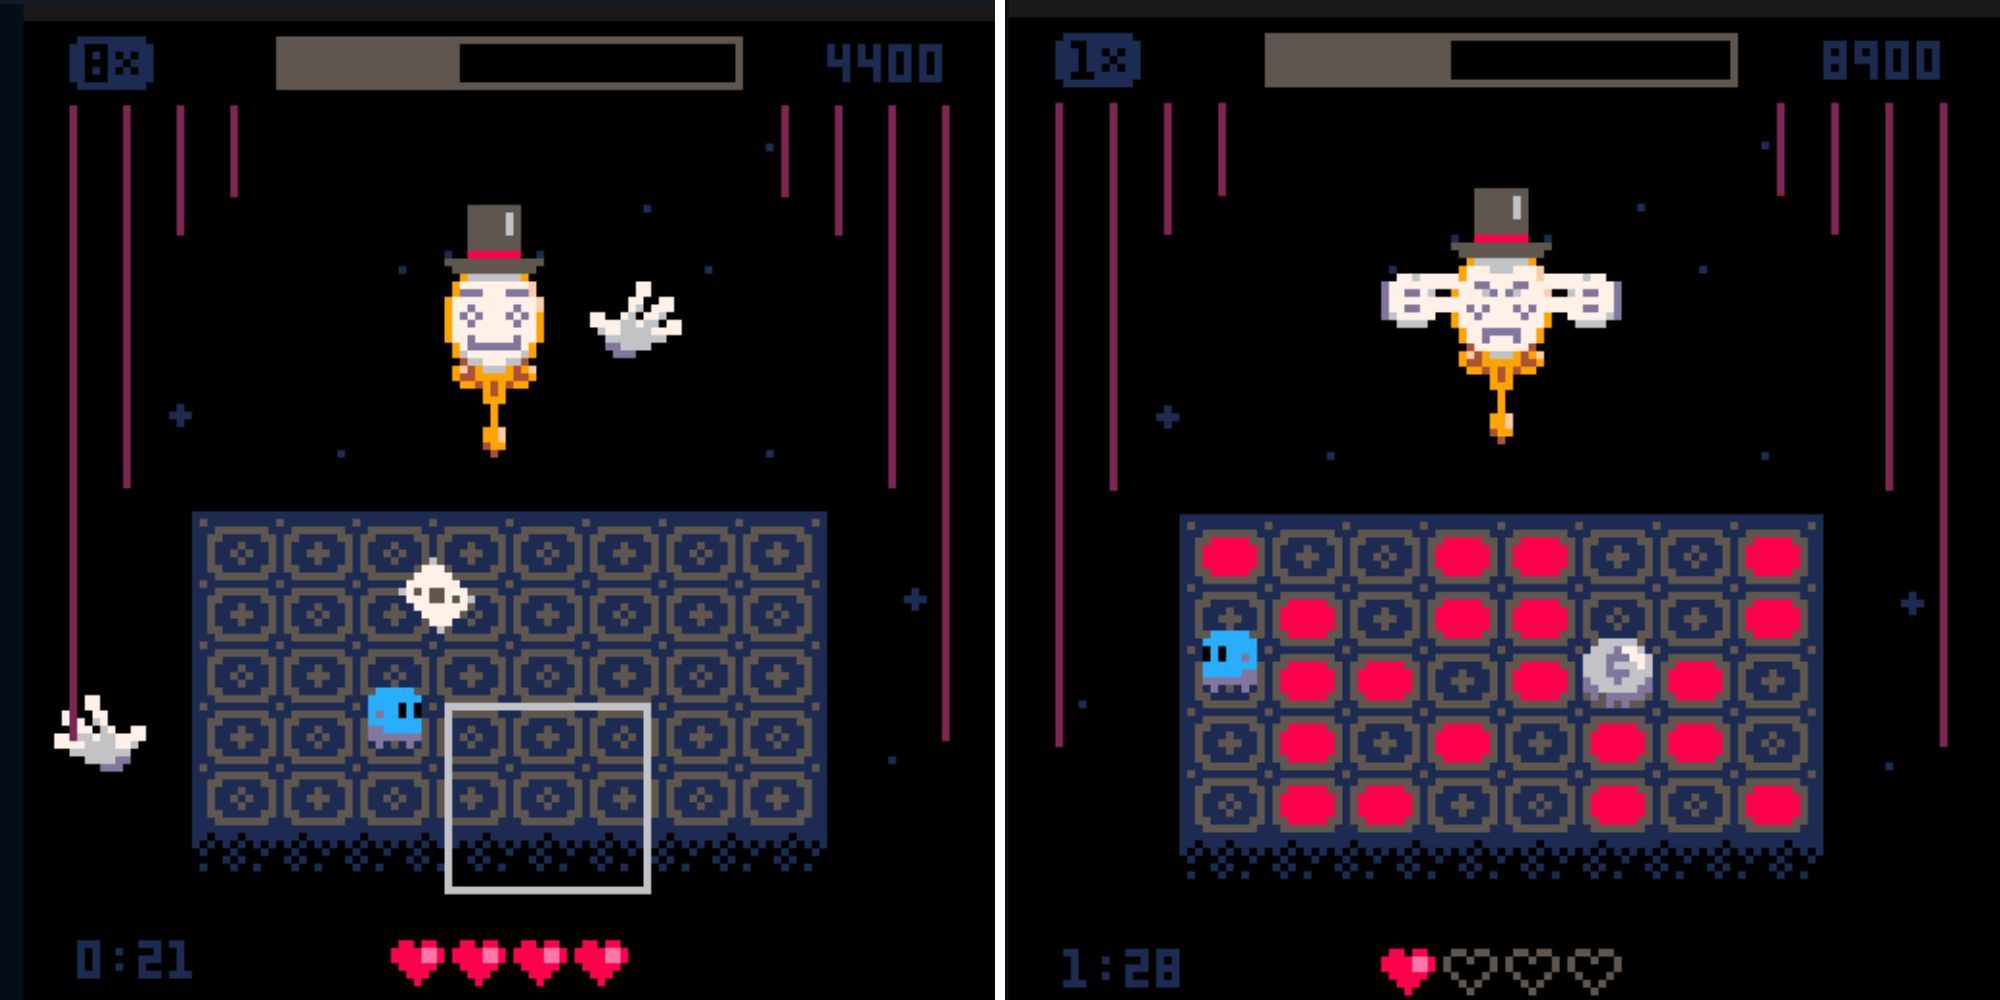 A split image of an 8-bit, grid-like floor, a blue player character, red tiles and hearts, and a magician boss wearing a black top hat.